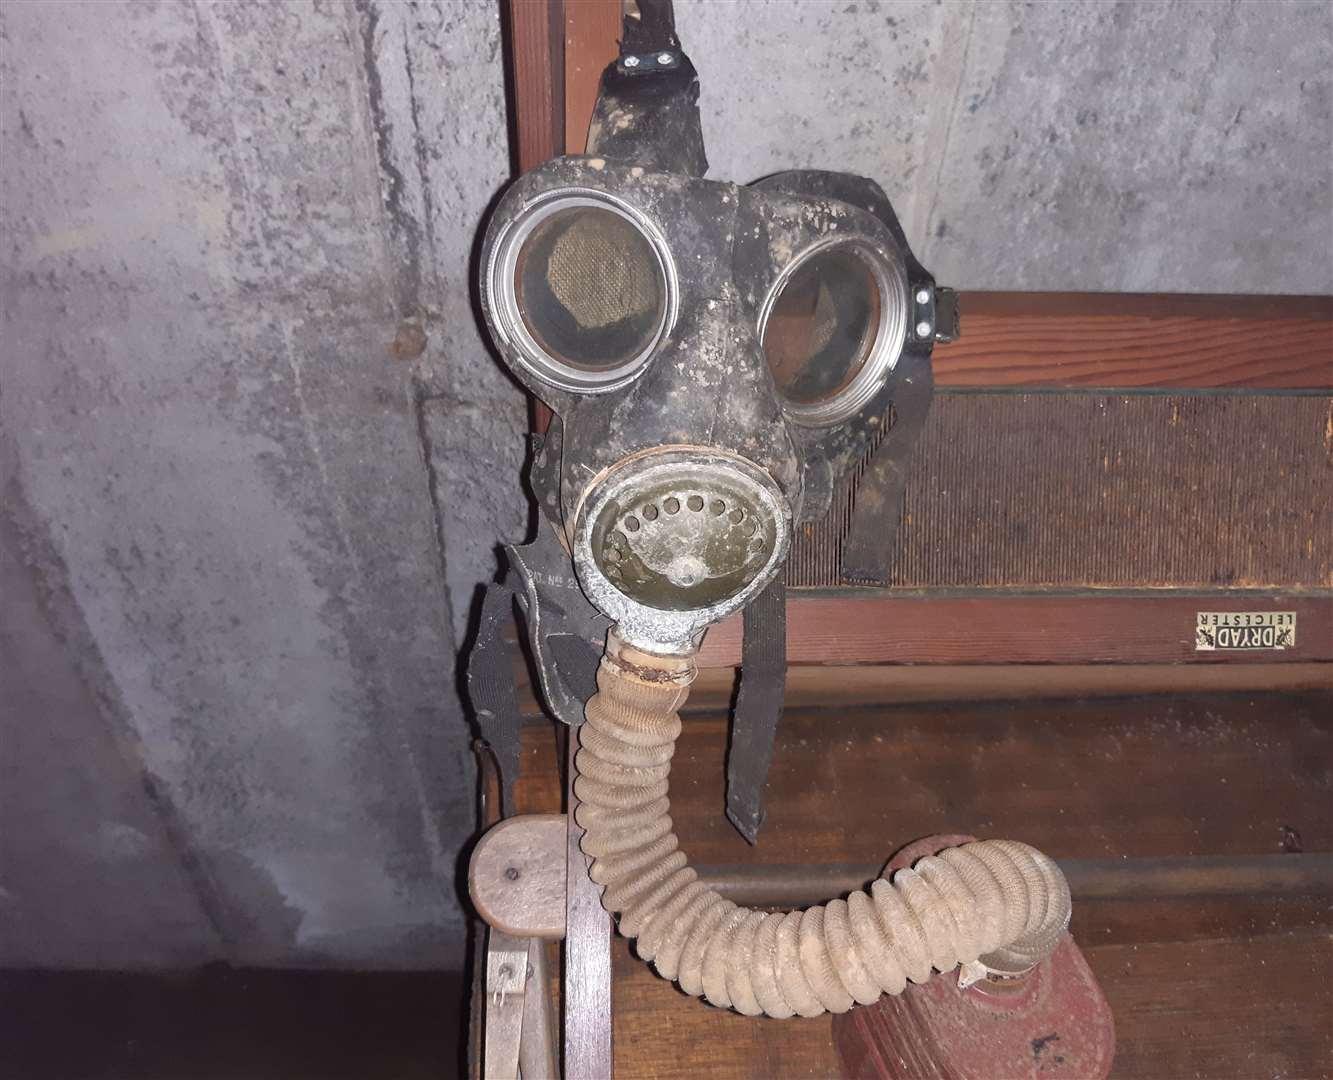 A gas mask left in the tunnels